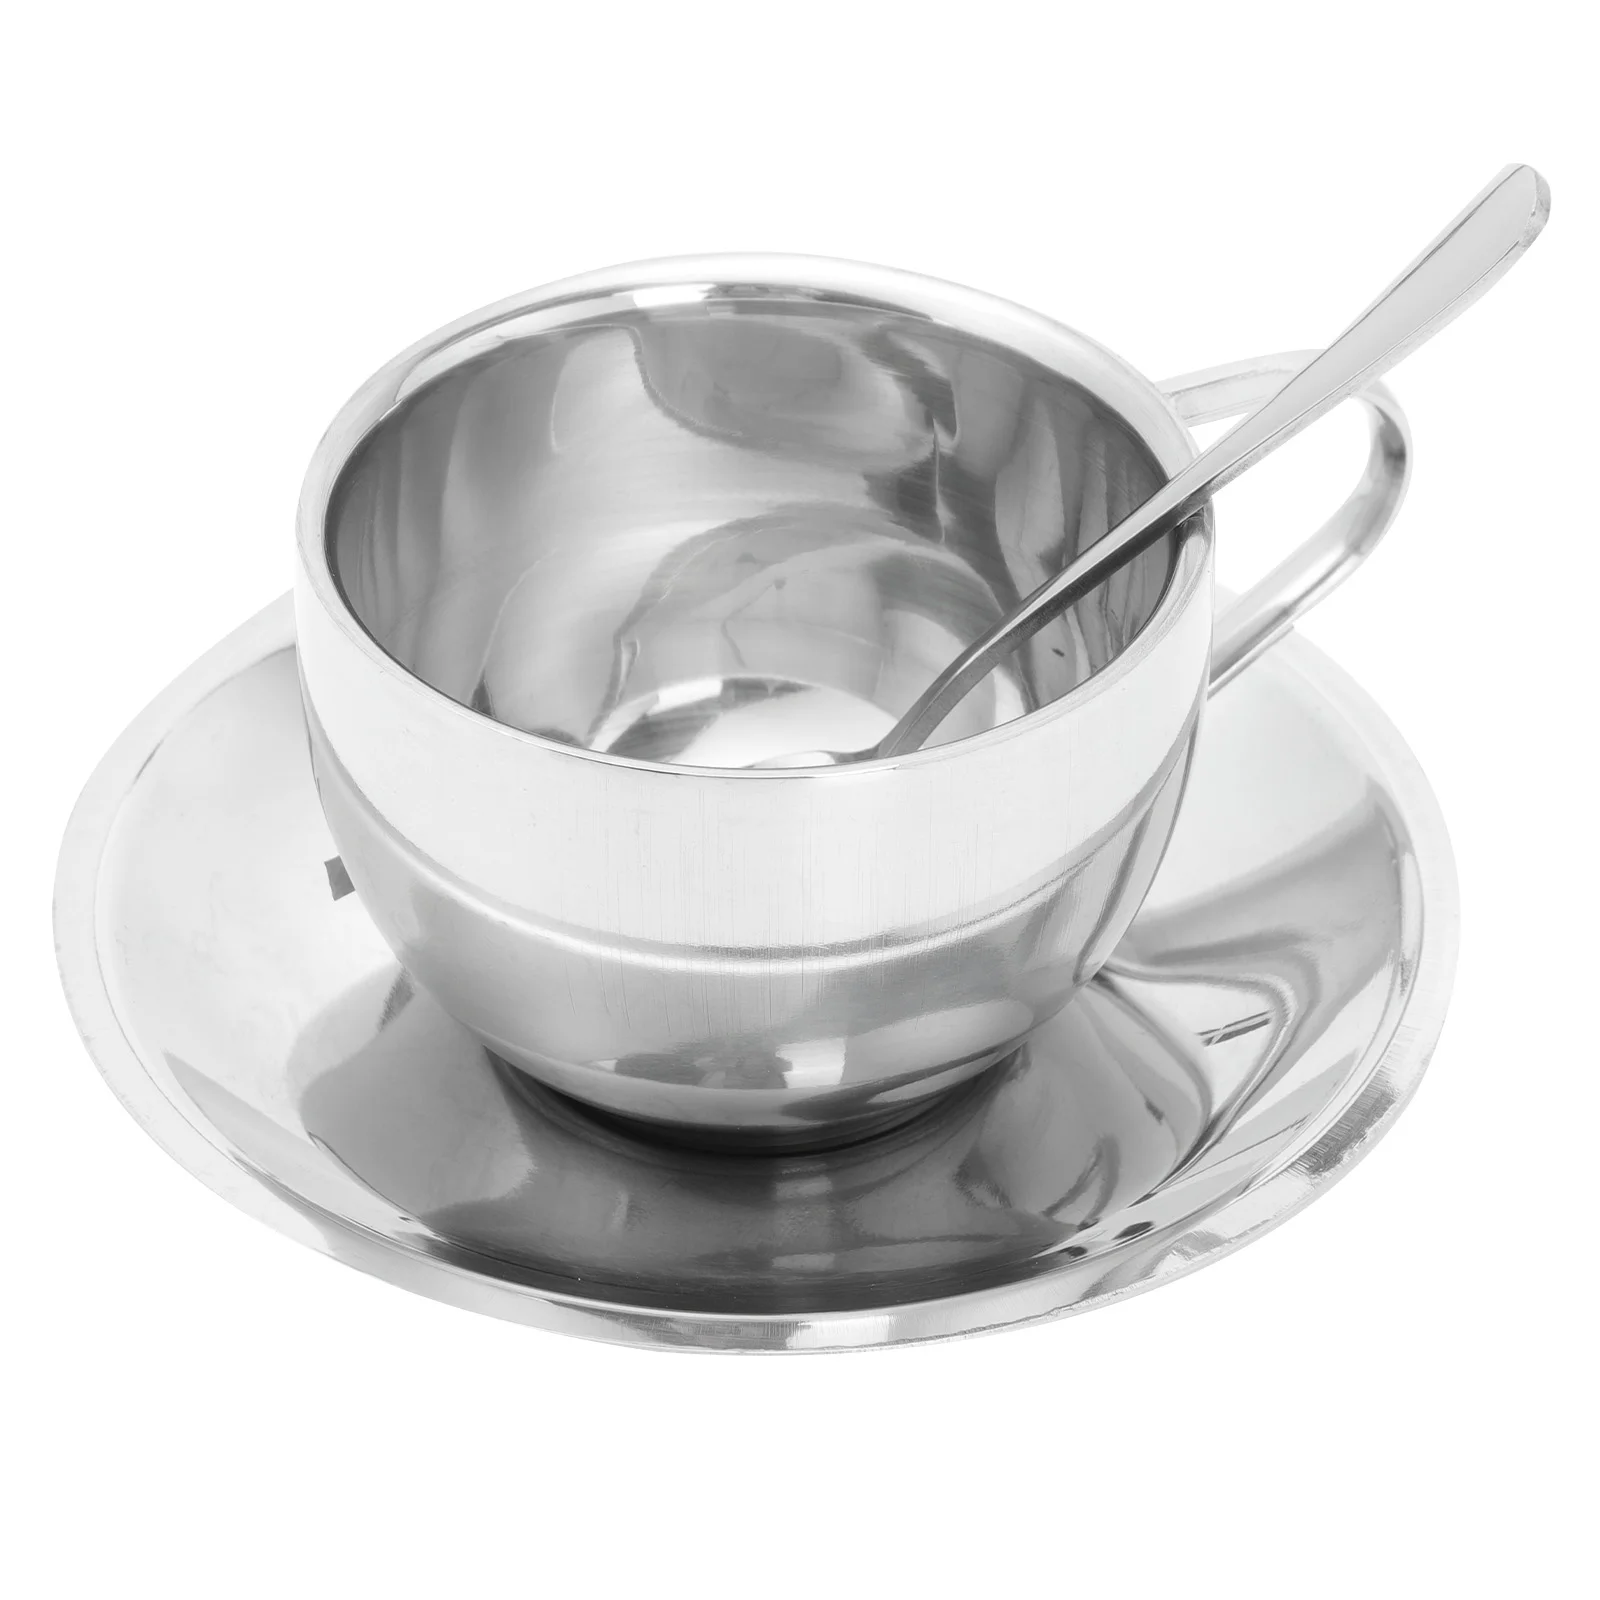 

Cup Tea Coffee Cups Mug Set Steel Stainless Espresso Saucer Metal Cappuccino Latte Spoon Milk Teacup Double Walled Drinking